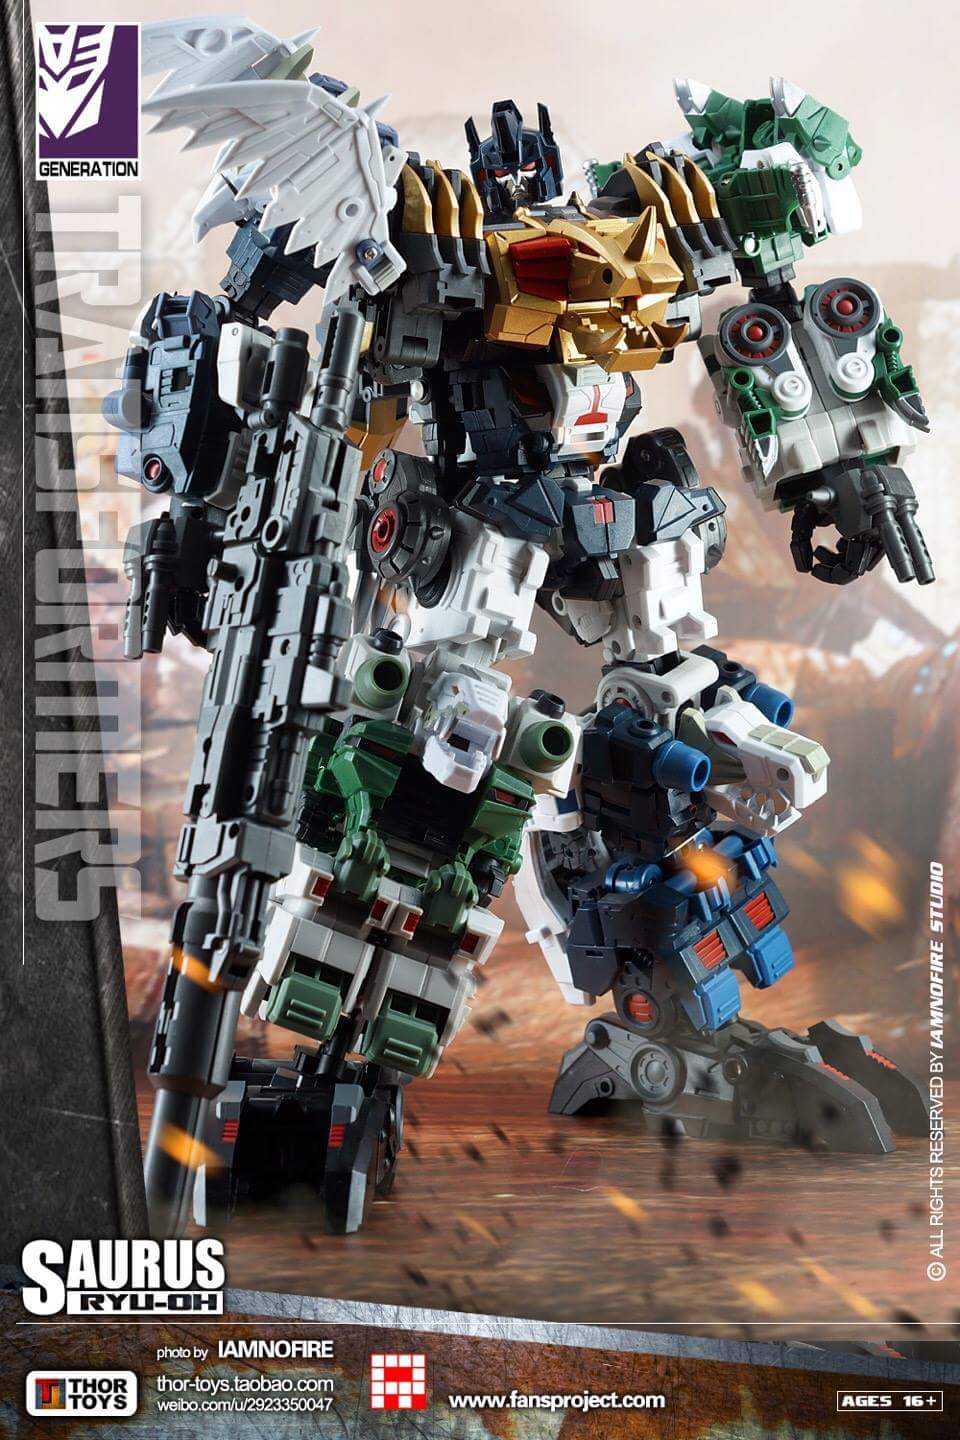 [FansProject] Produit Tiers - Ryu-Oh aka Dinoking (Victory) | Beastructor aka Monstructor (USA) - Page 2 KmewucCZ